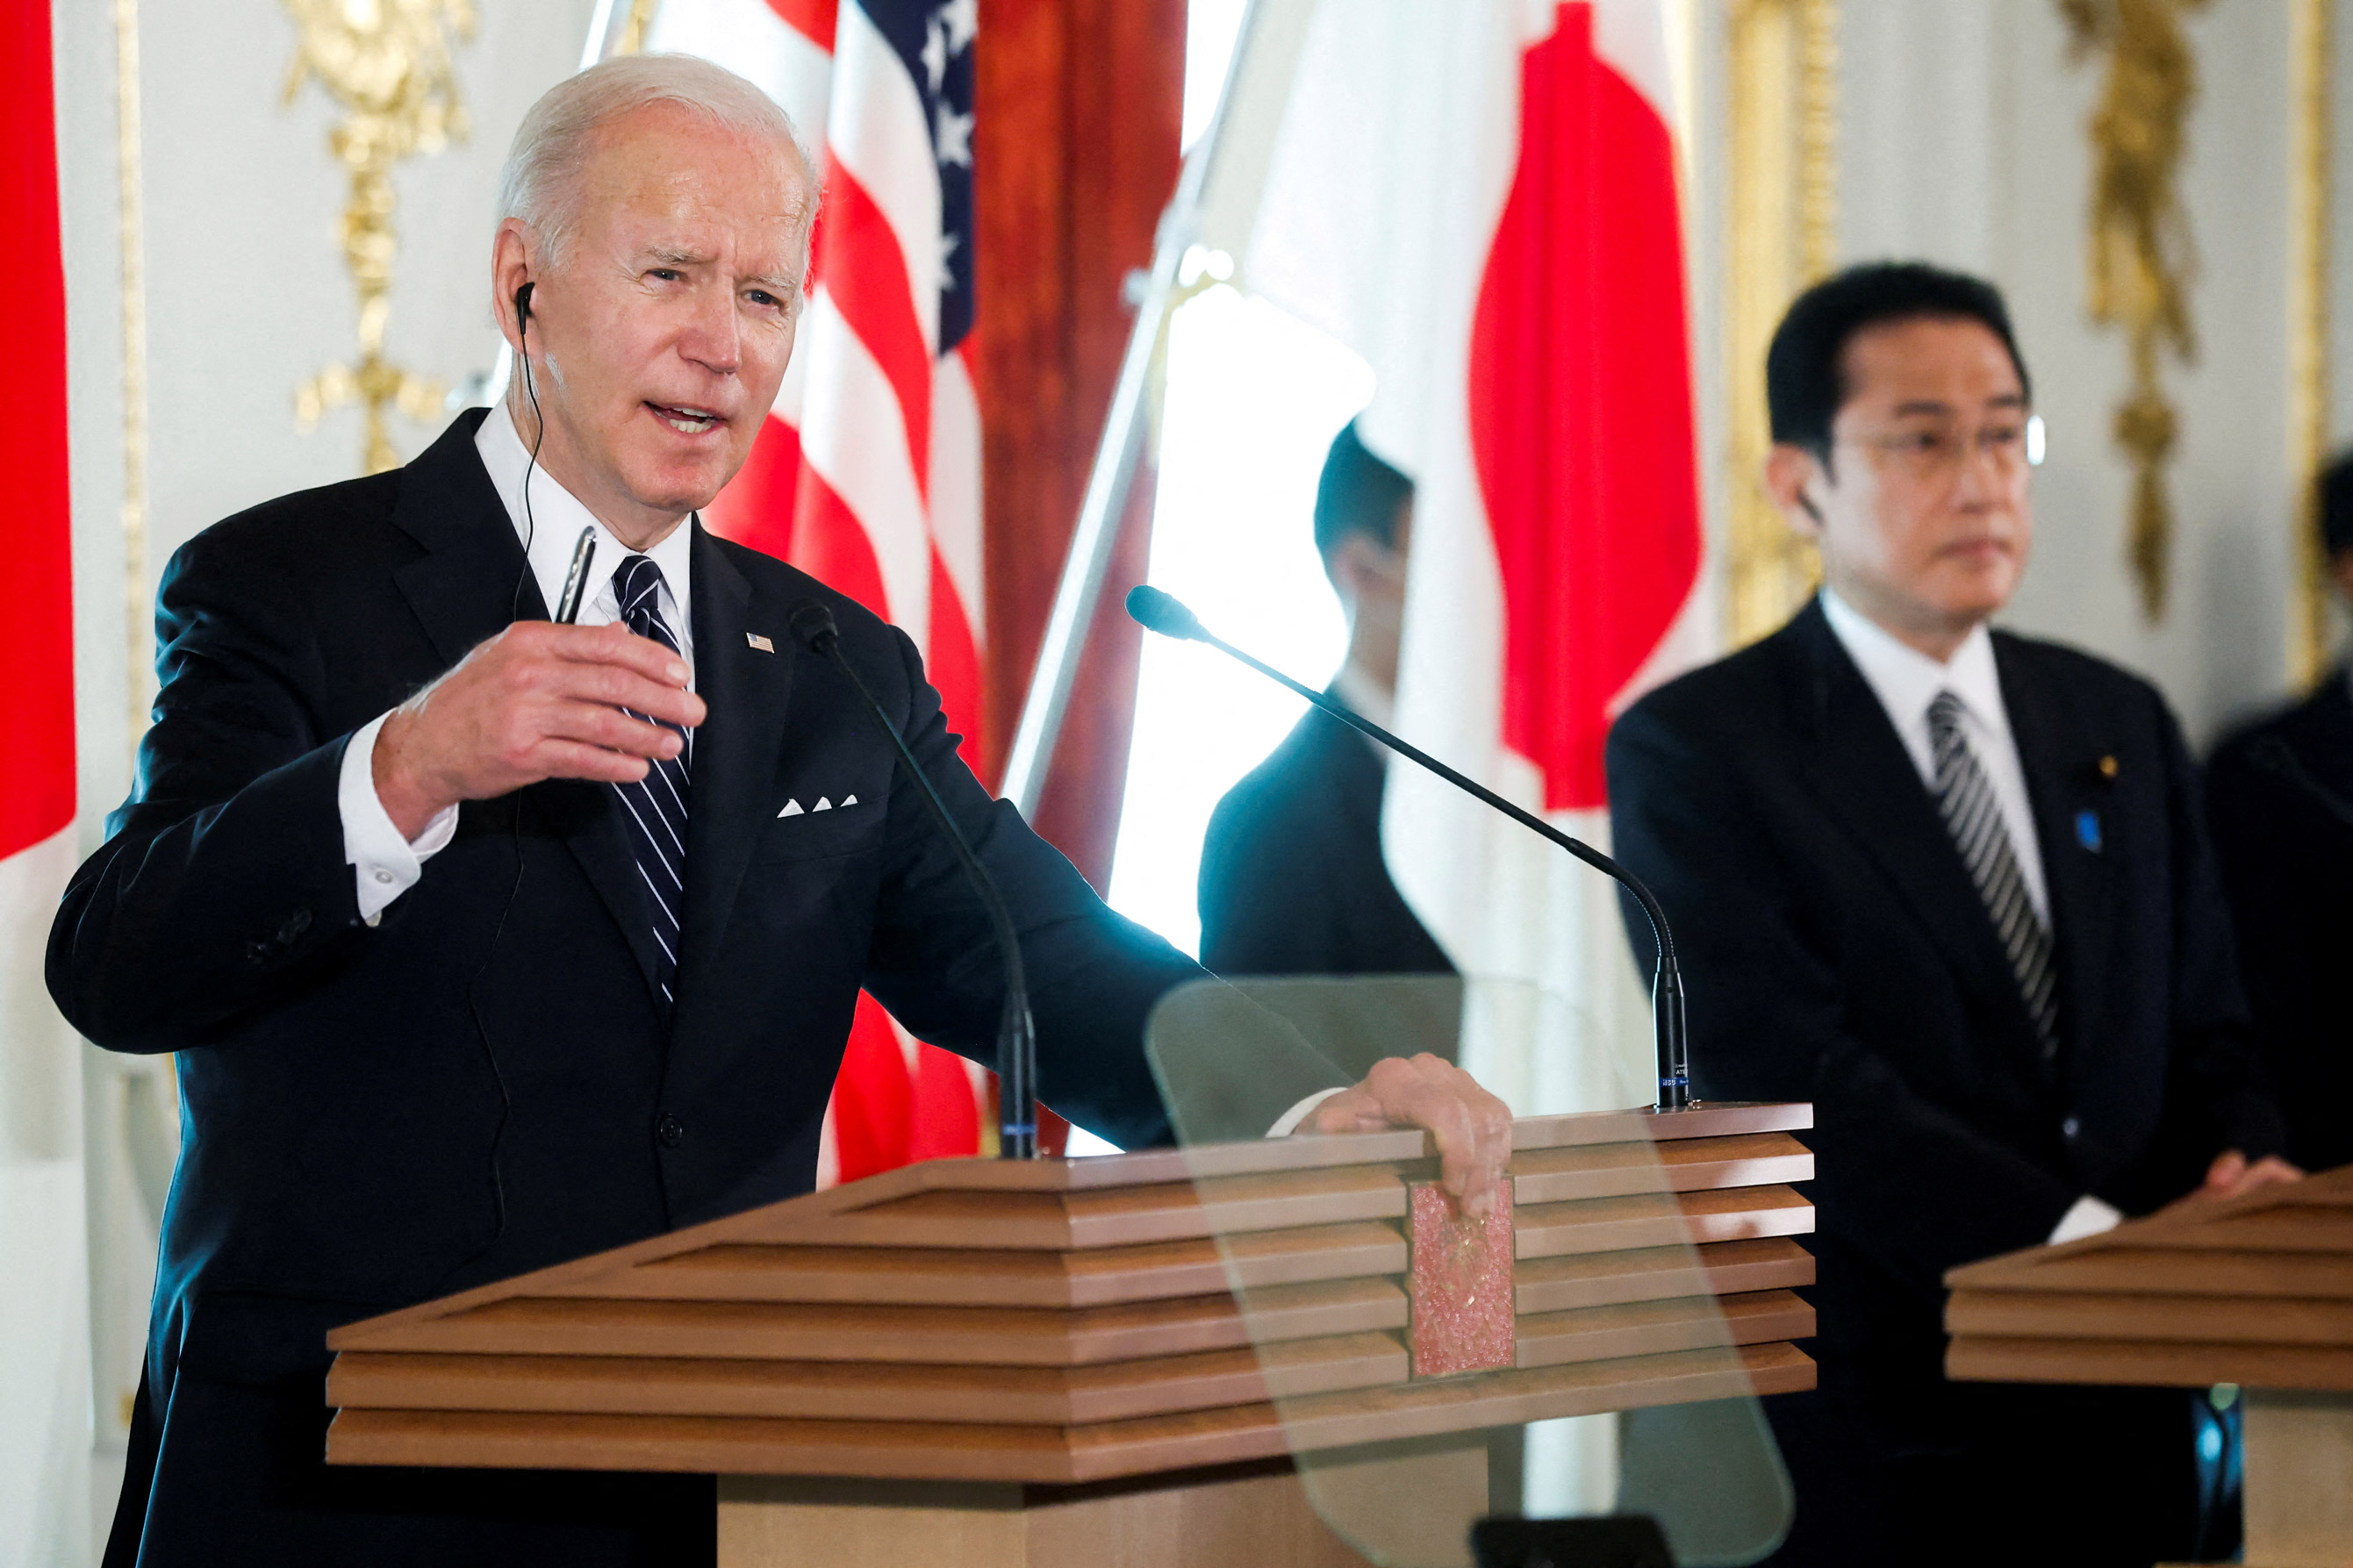 US President Joe Biden speaks during a joint news conference with Japan's Prime Minister Fumio Kishida at Akasaka Palace in Tokyo on May 23.